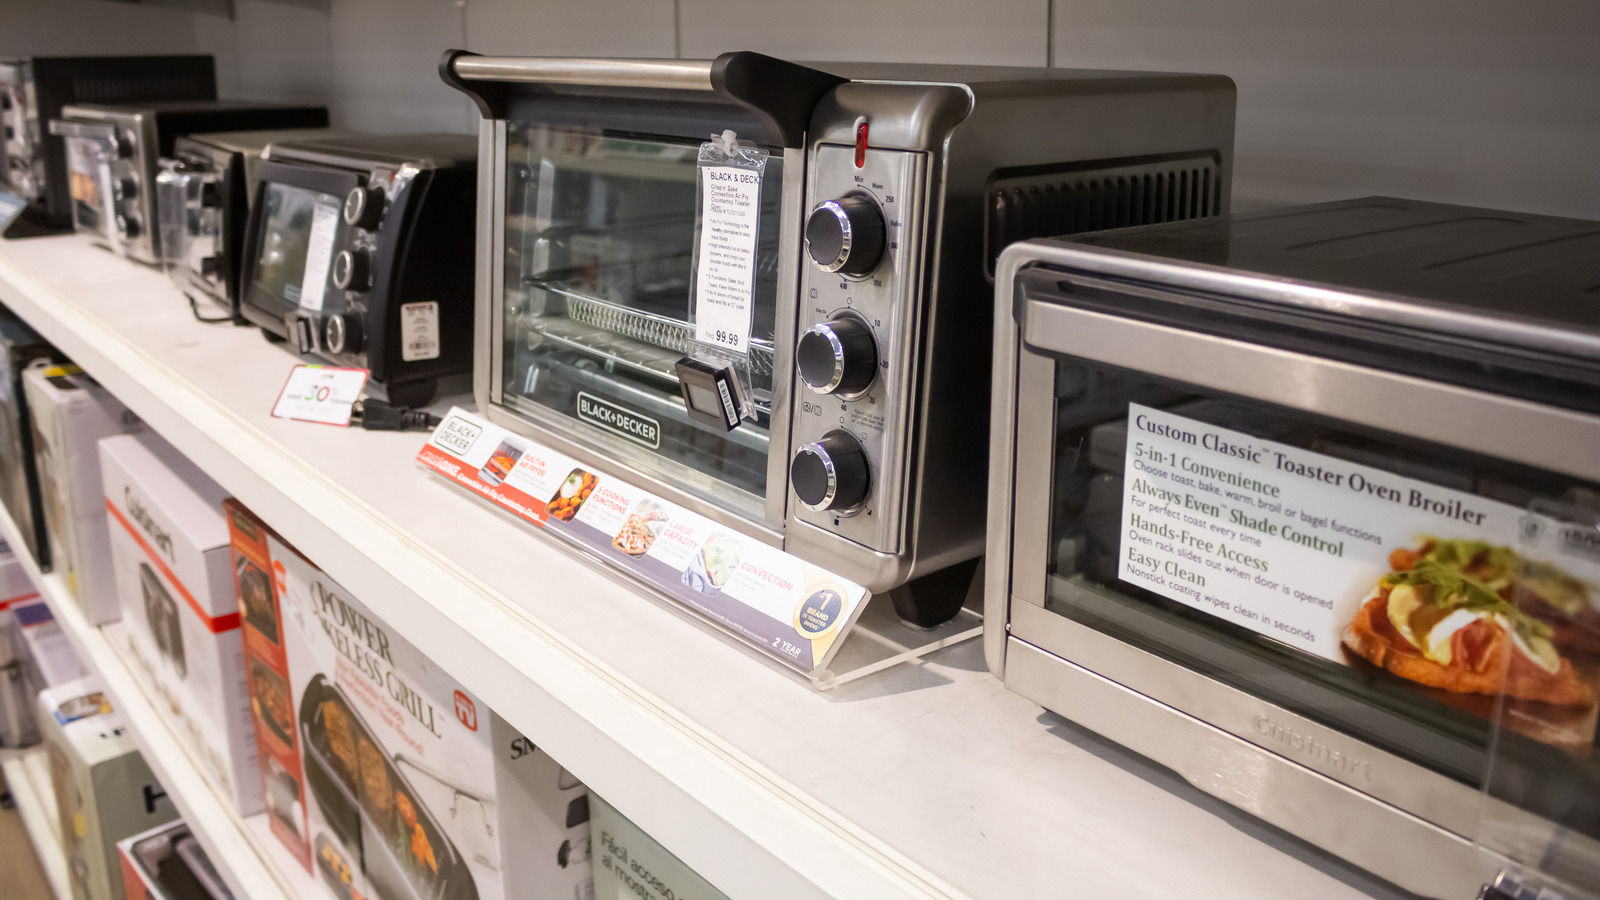 Is There A Difference Between Convection Ovens And Toaster Ovens?